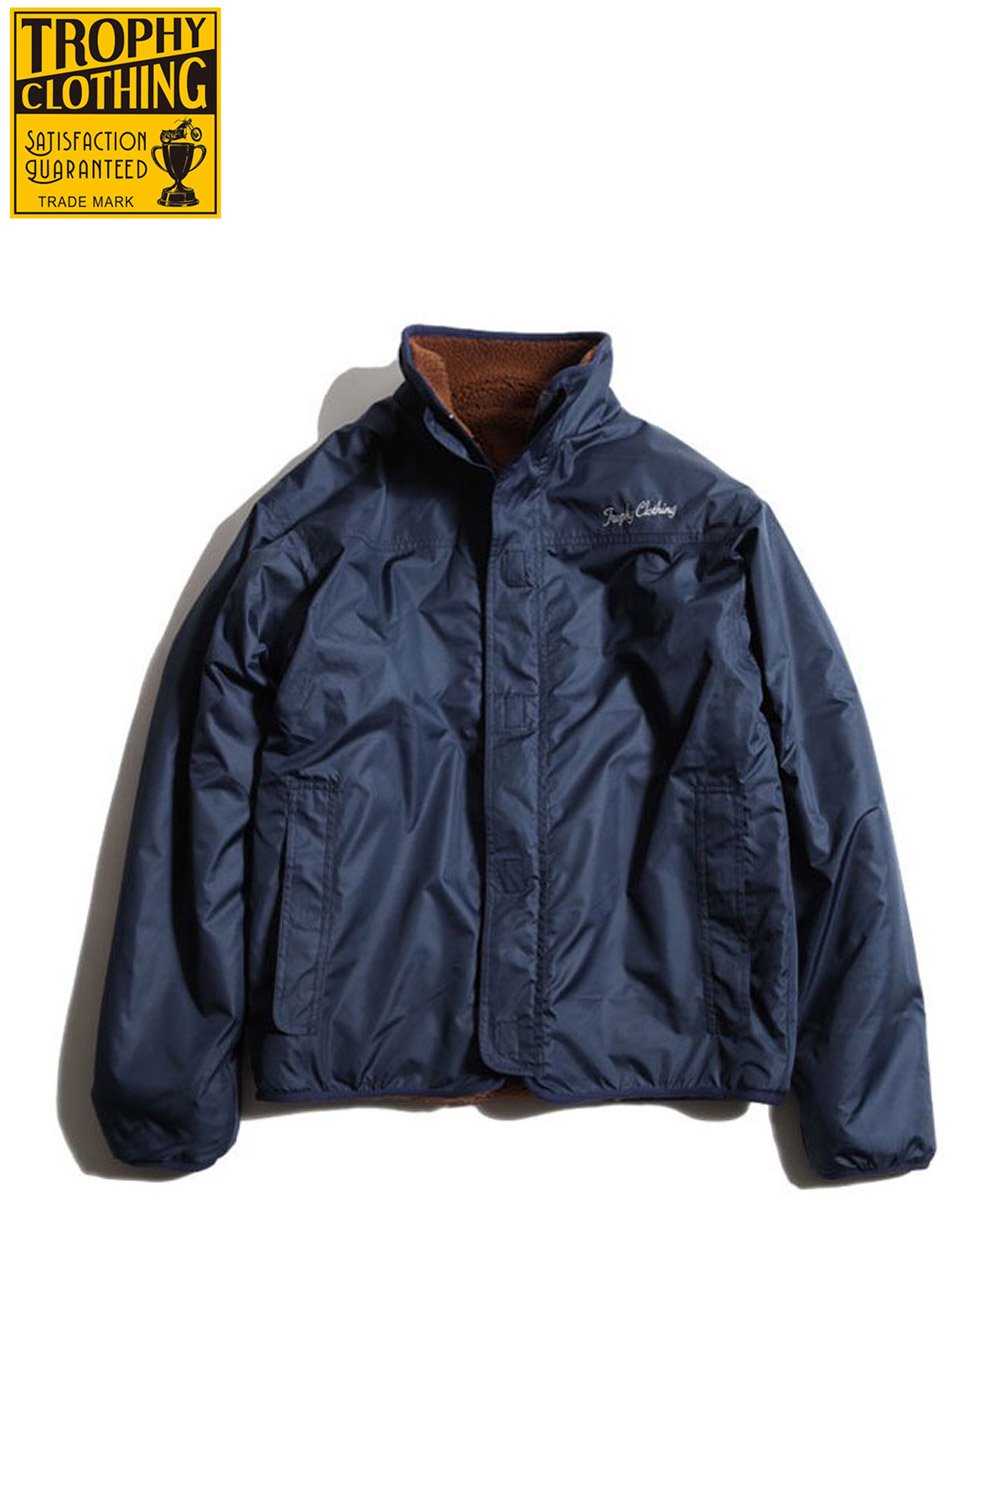 TROPHY CLOTHING(トロフィークロージング) マウンテンジャケット 2 FACE MOUNTAIN JACKET TR21AW-504  通販正規取扱 | ハーレムストア公式通販サイト